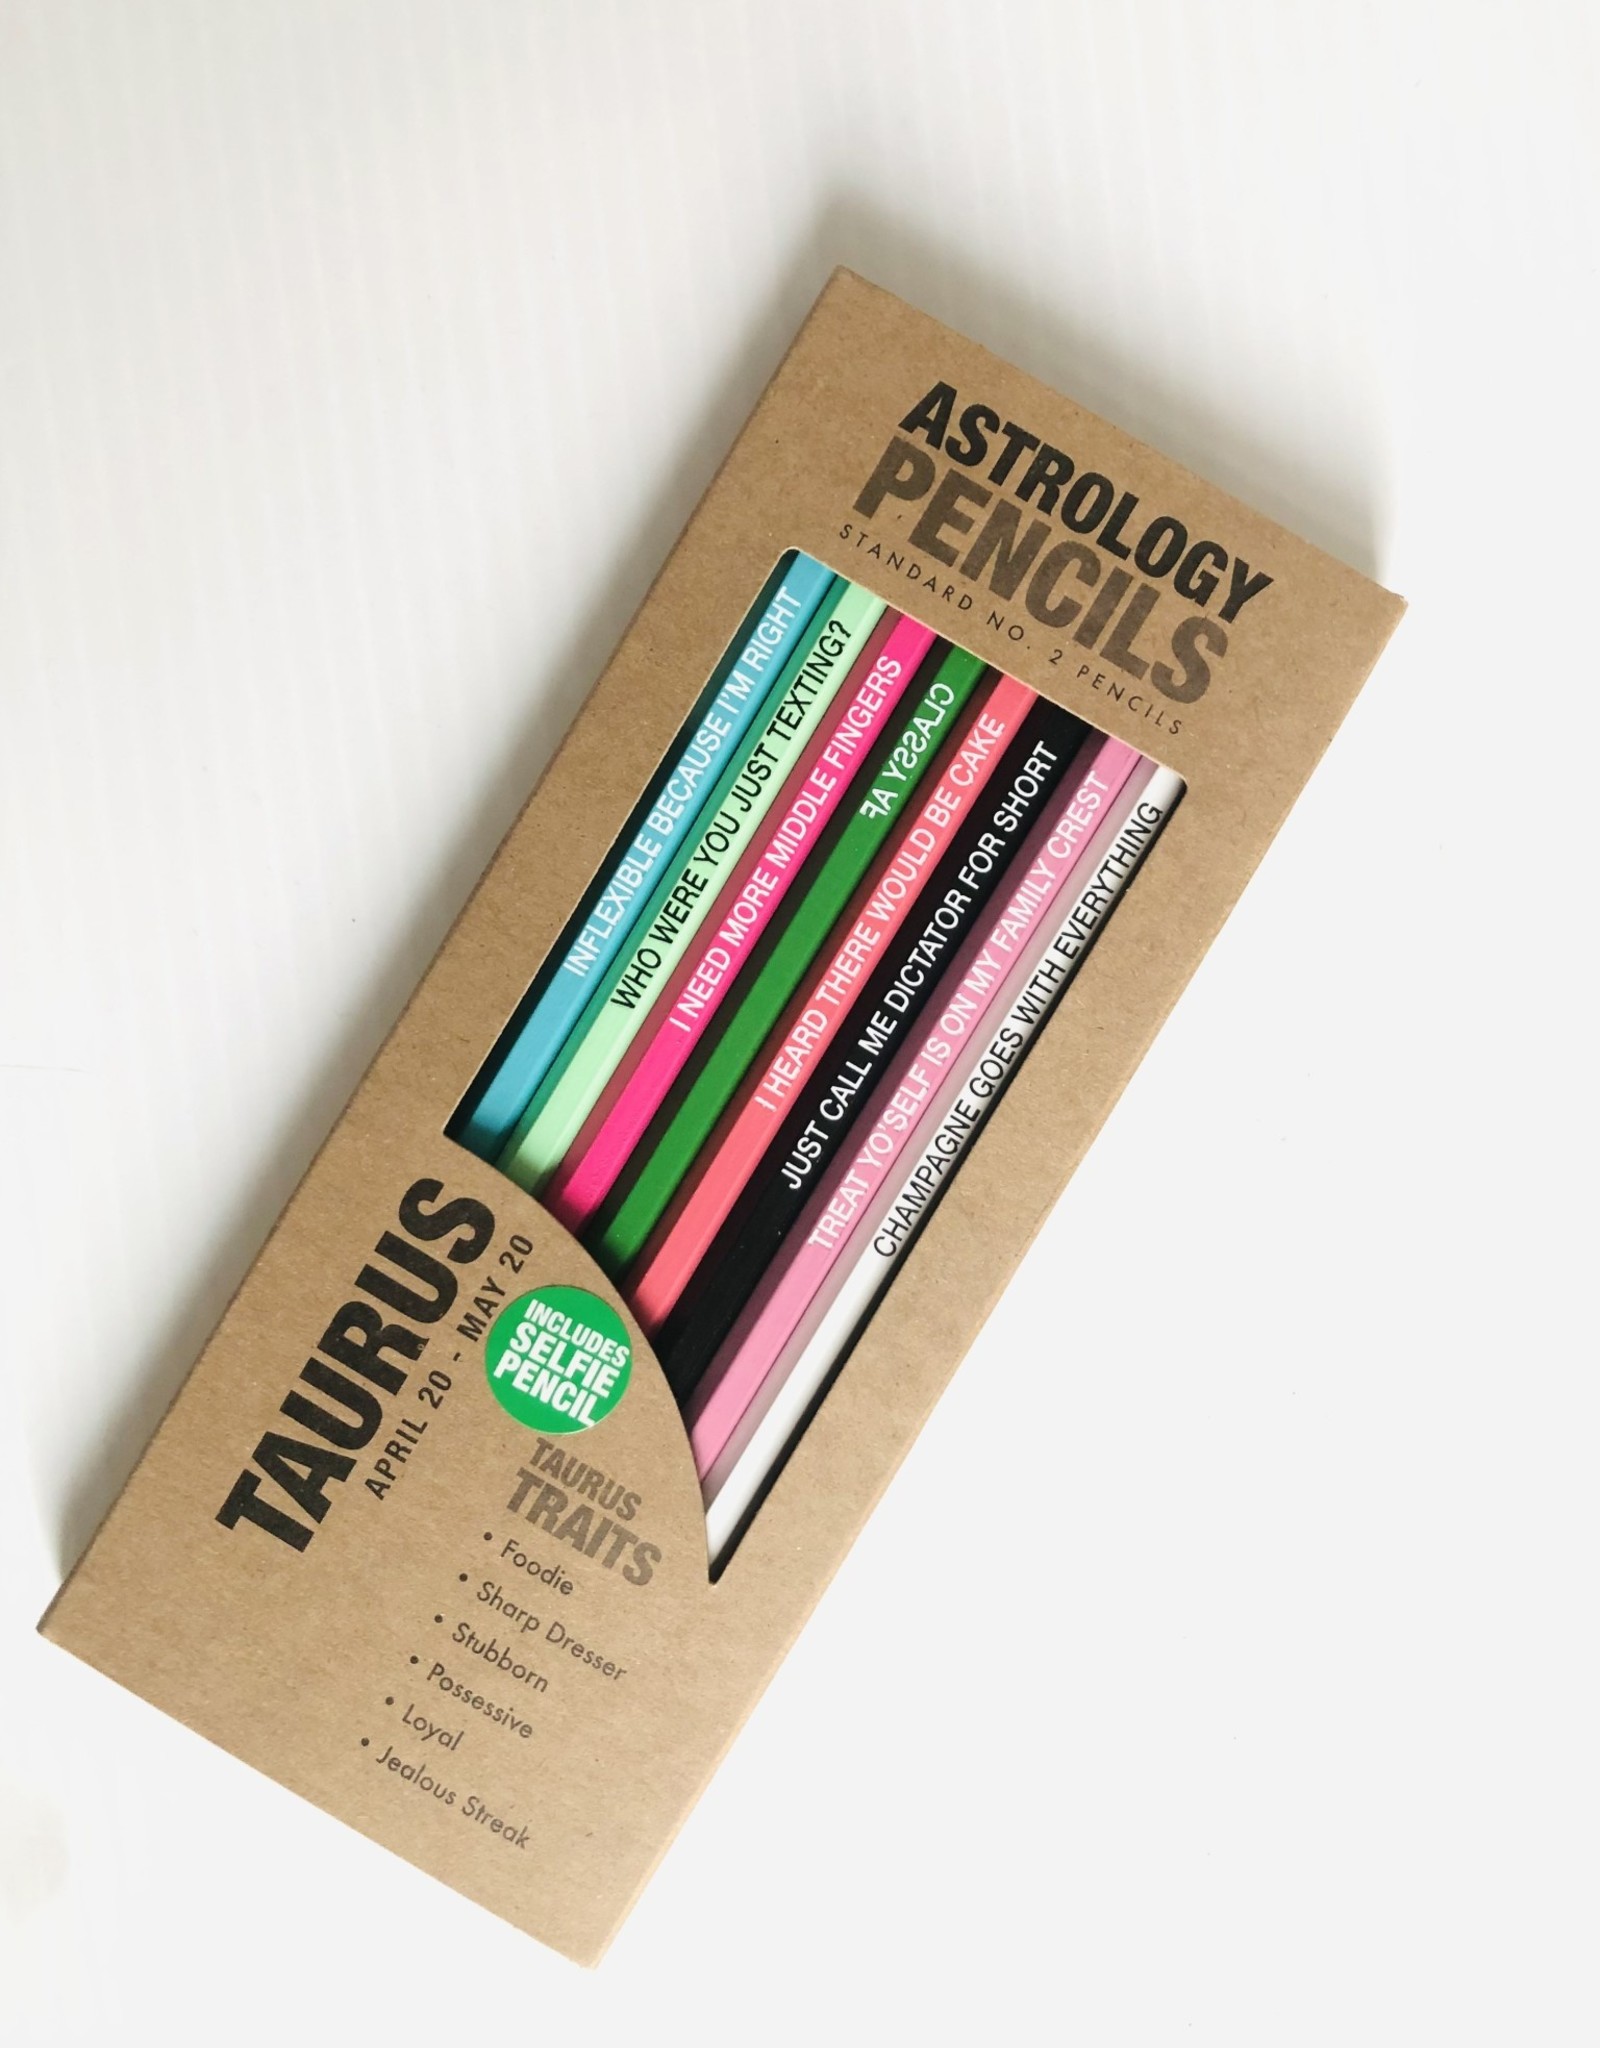 Whiskey River Soap Co Astrology Pencils